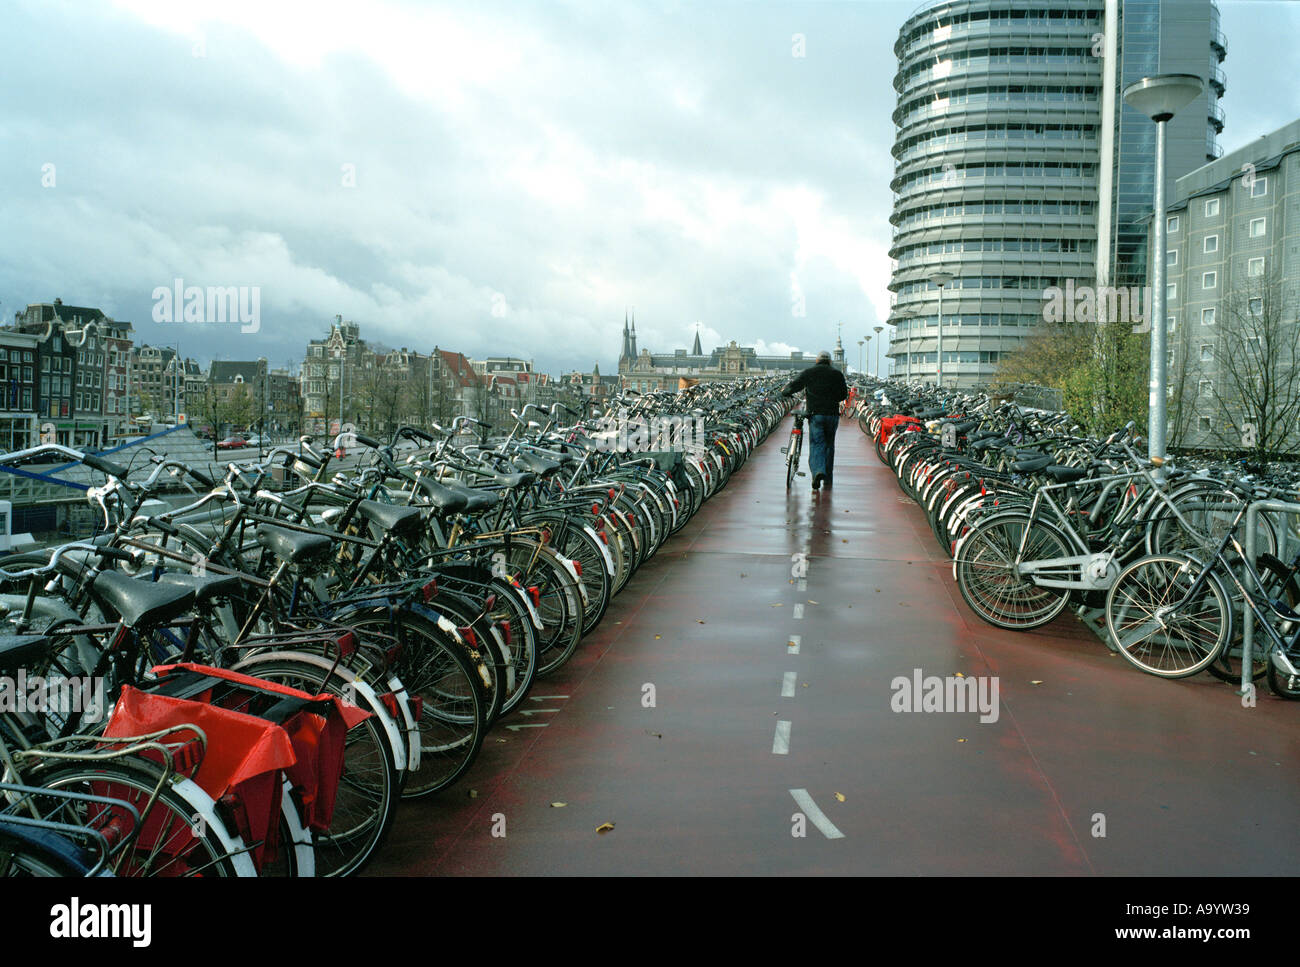 Multi storey bicycle park in Amsterdam Stock Photo